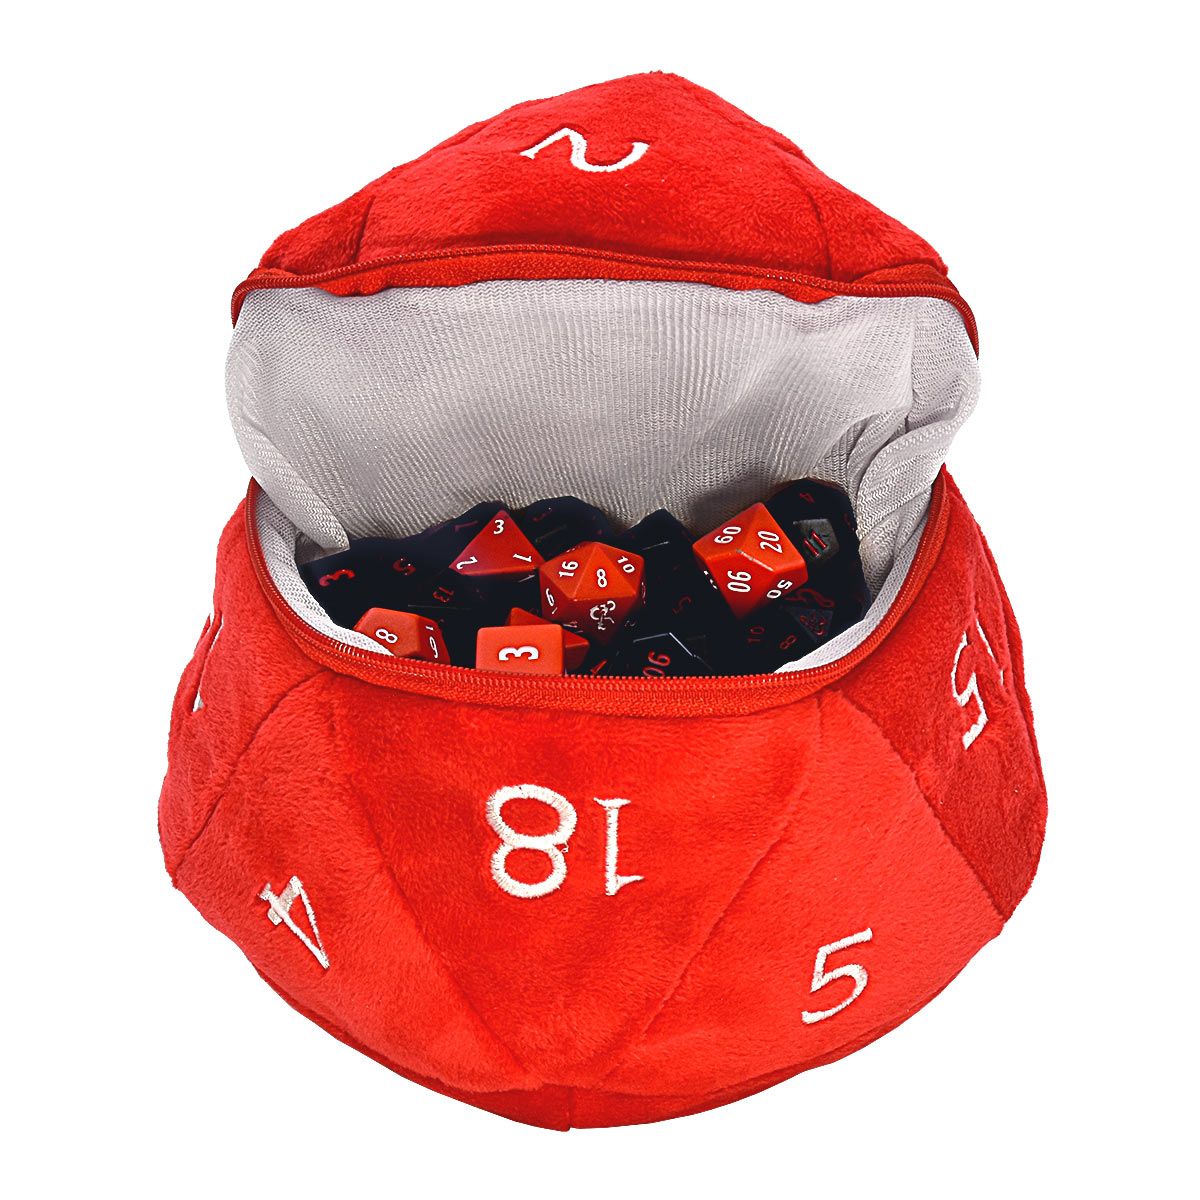 D&D D20 Plush Red and White Dice Bag